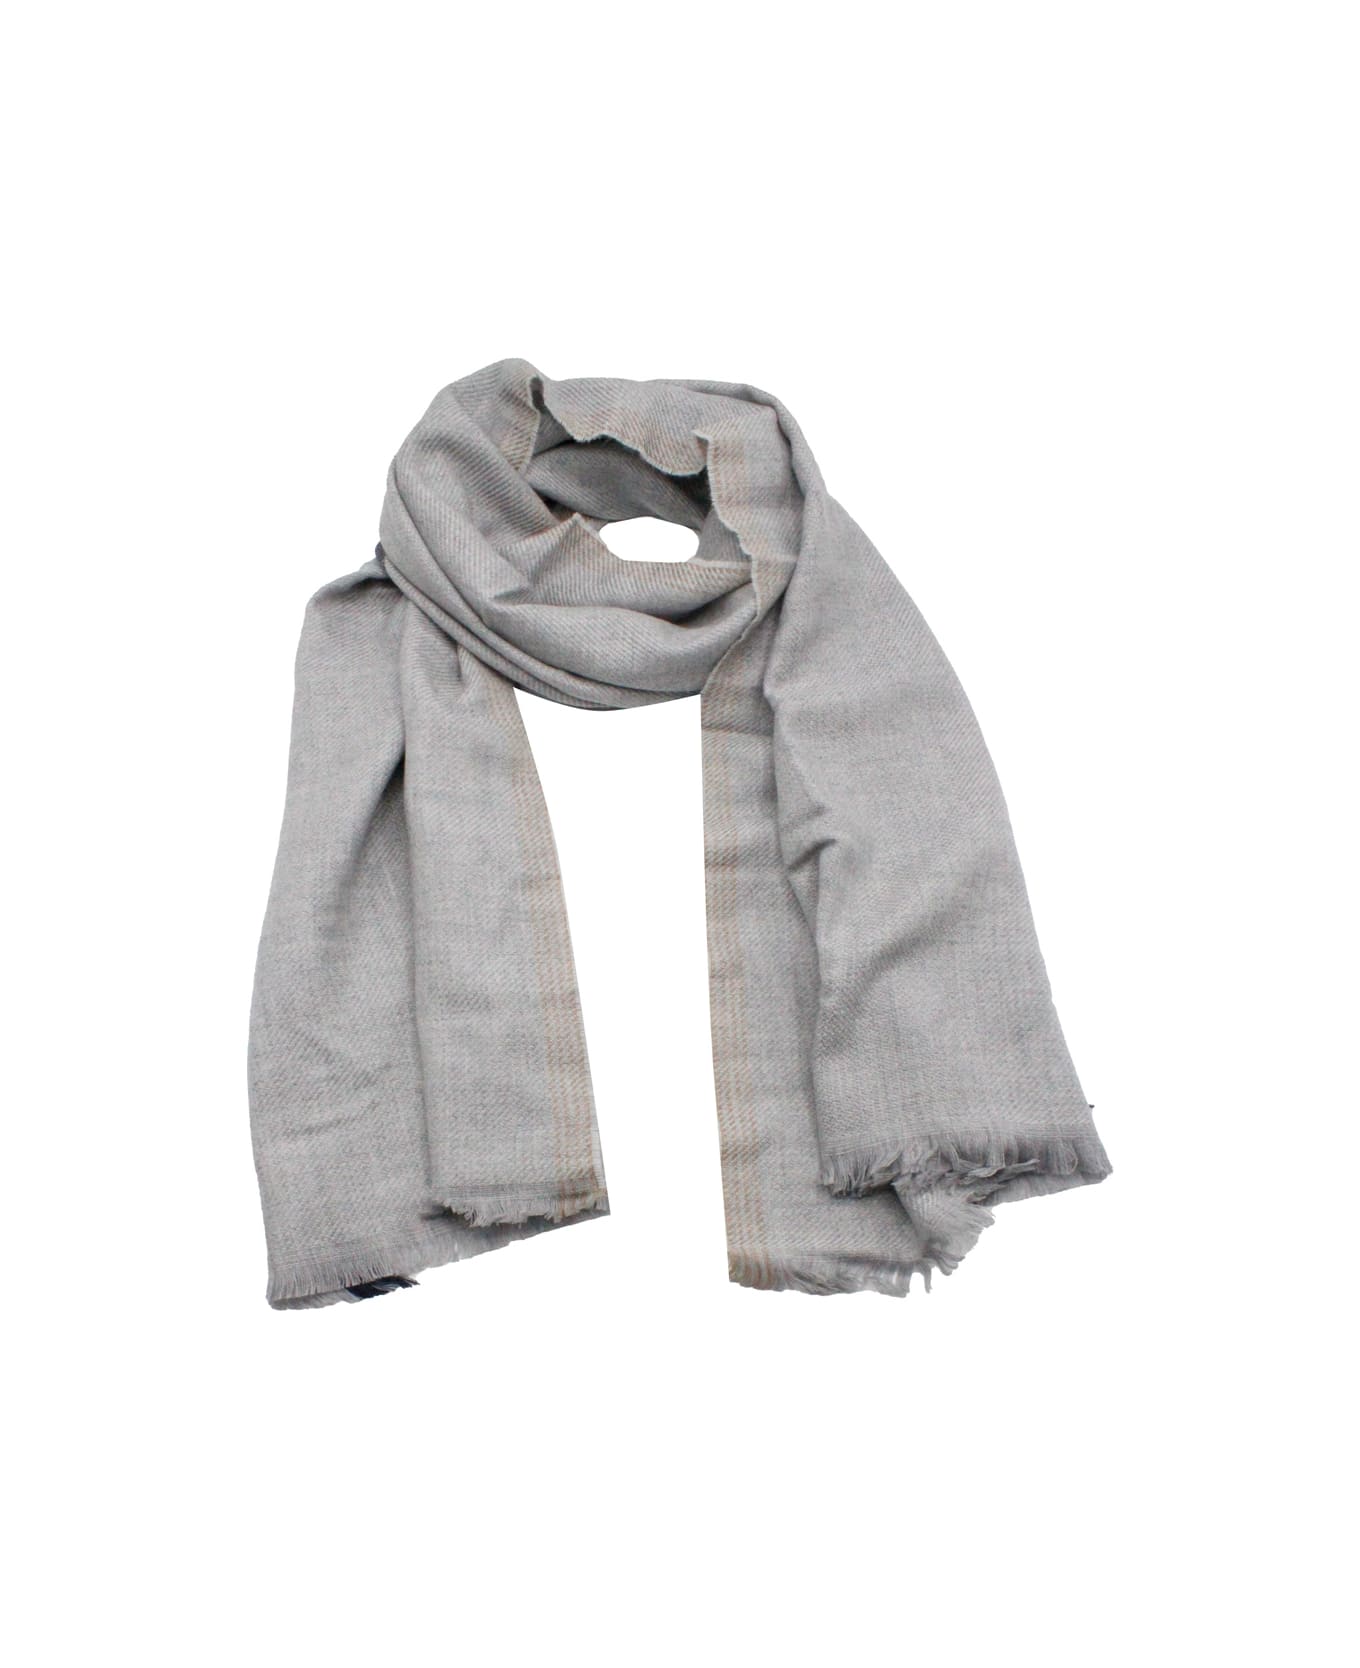 Brunello Cucinelli Lightweight Scarf Made Of Wool And Cashmere With A Light Weave In Diagonaòle And Side Selvedge With Small Fringes At The Bottom - Grey スカーフ